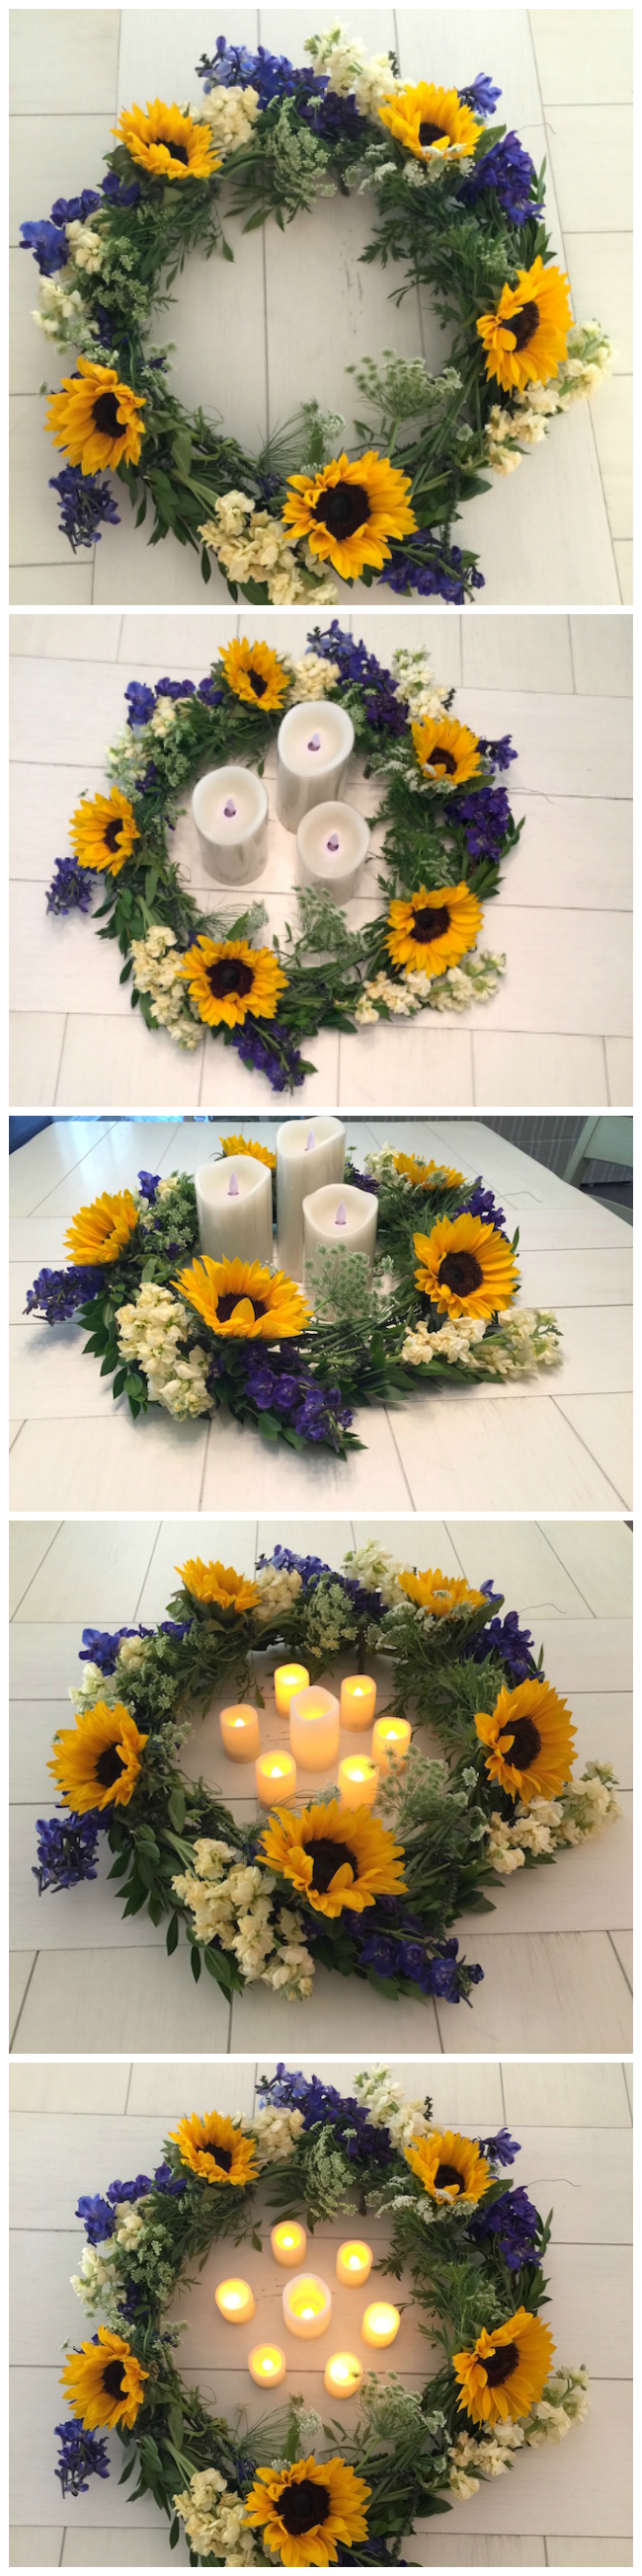 FiftyFlowers are wholesale flowers and have every kind of flower you are looking for for your event. I made a Sunflower Wreath and wedding corsage.